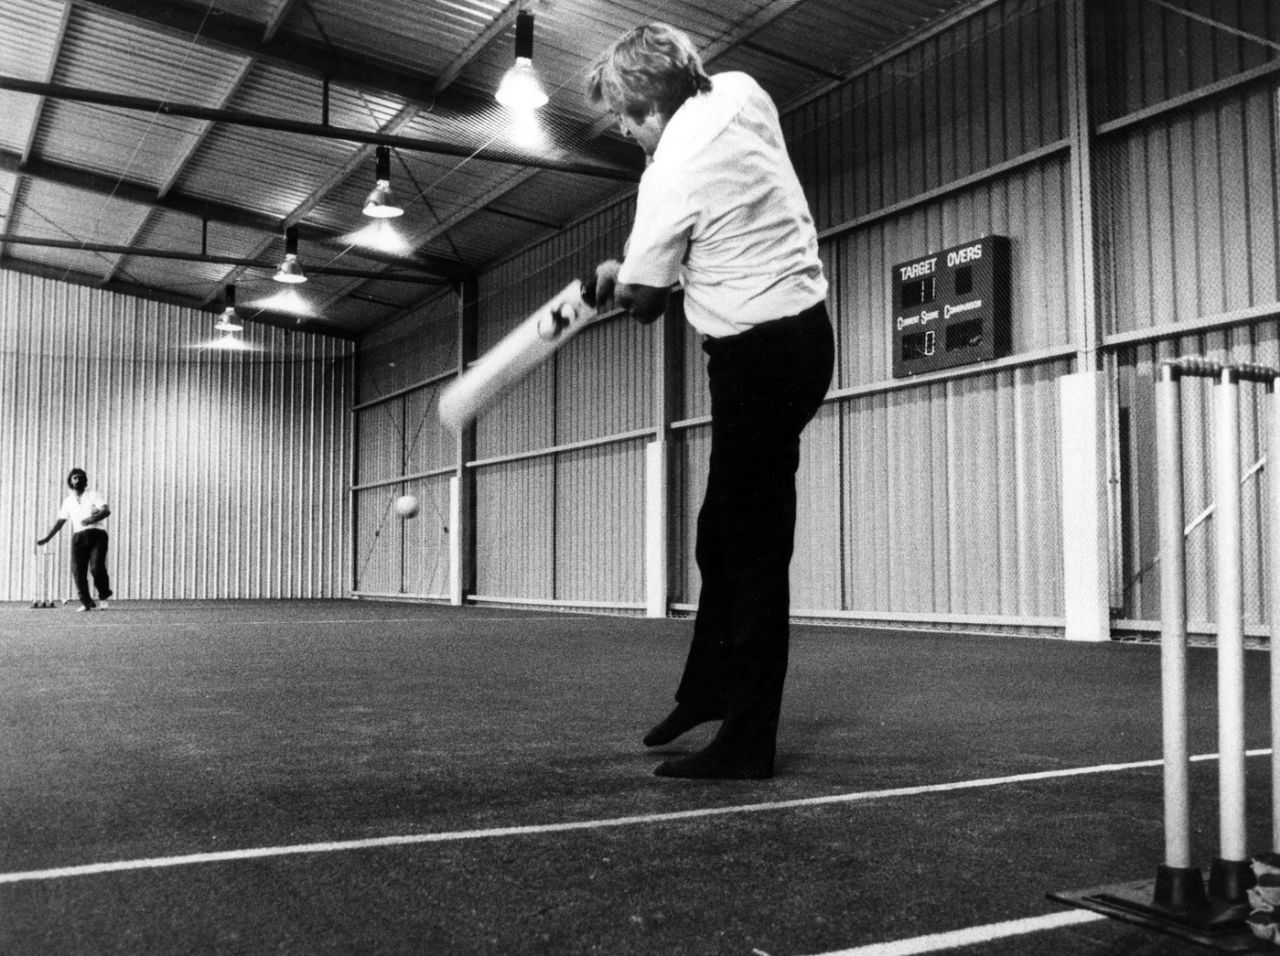 Gary Gilmour tries out the wicket at the new Cardiff Indoor Cricket centre, February 7, 1983